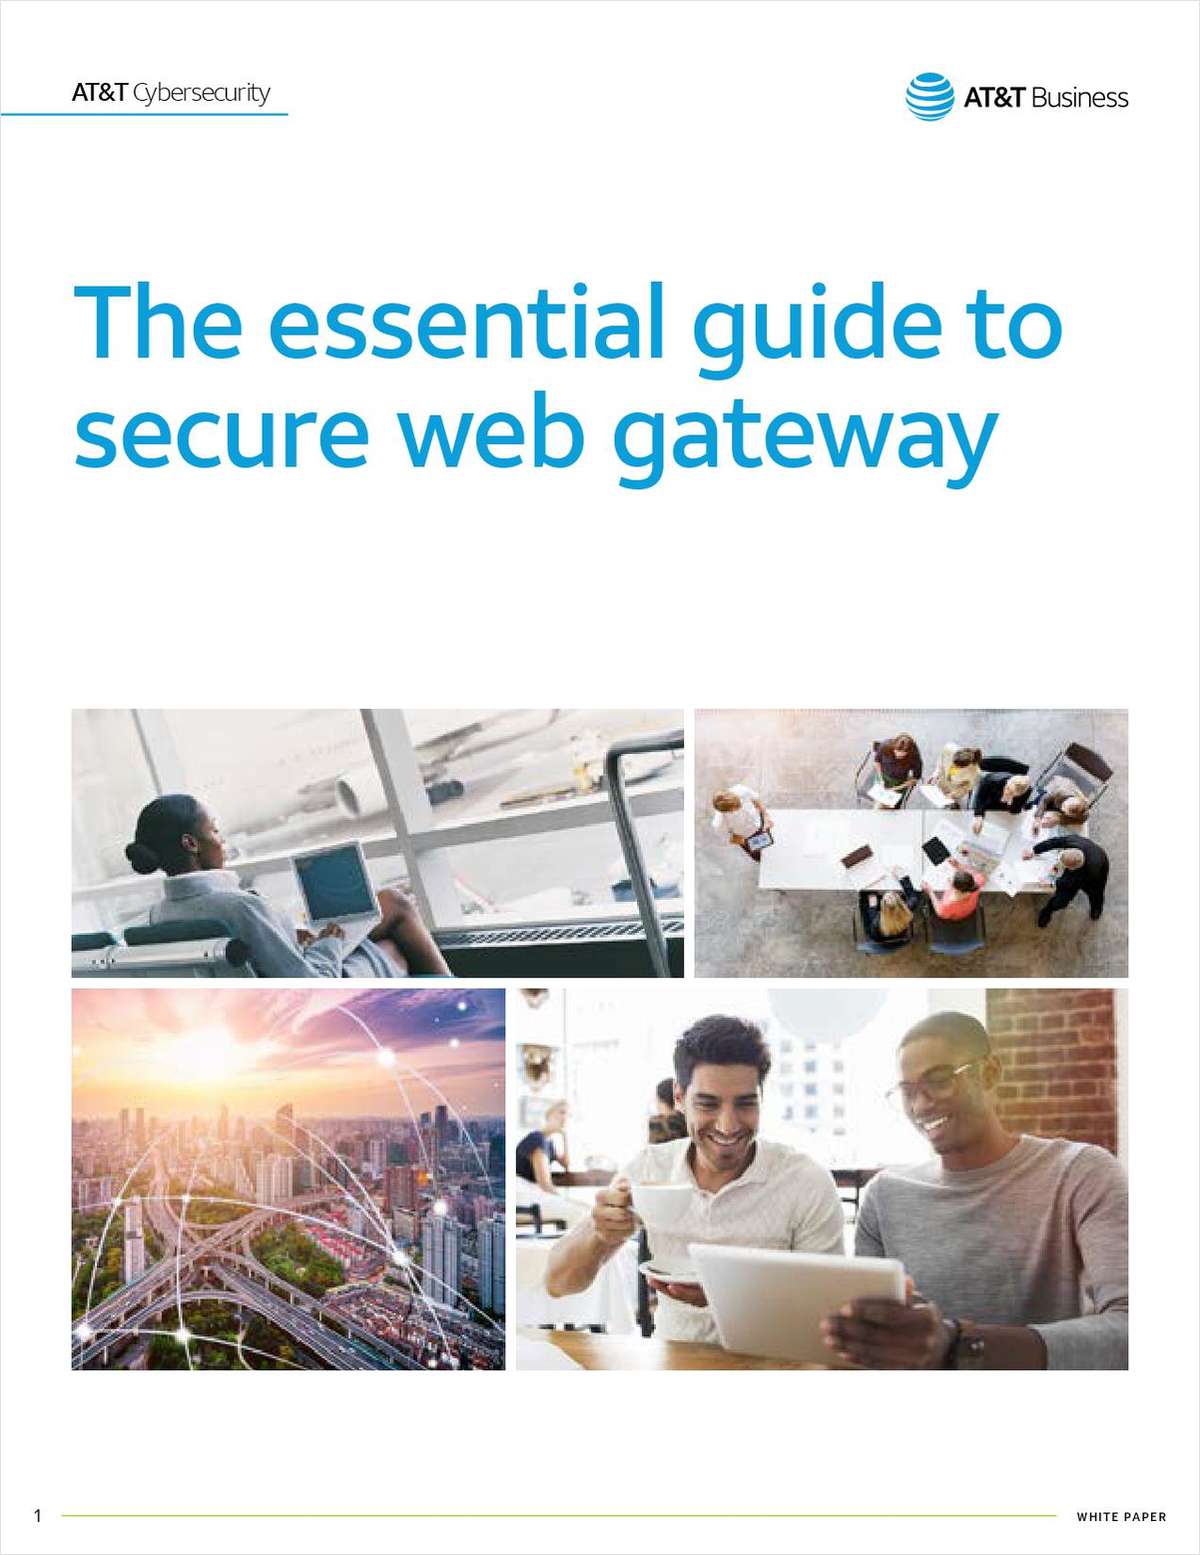 Secure Web Gateway: The Essential Guide